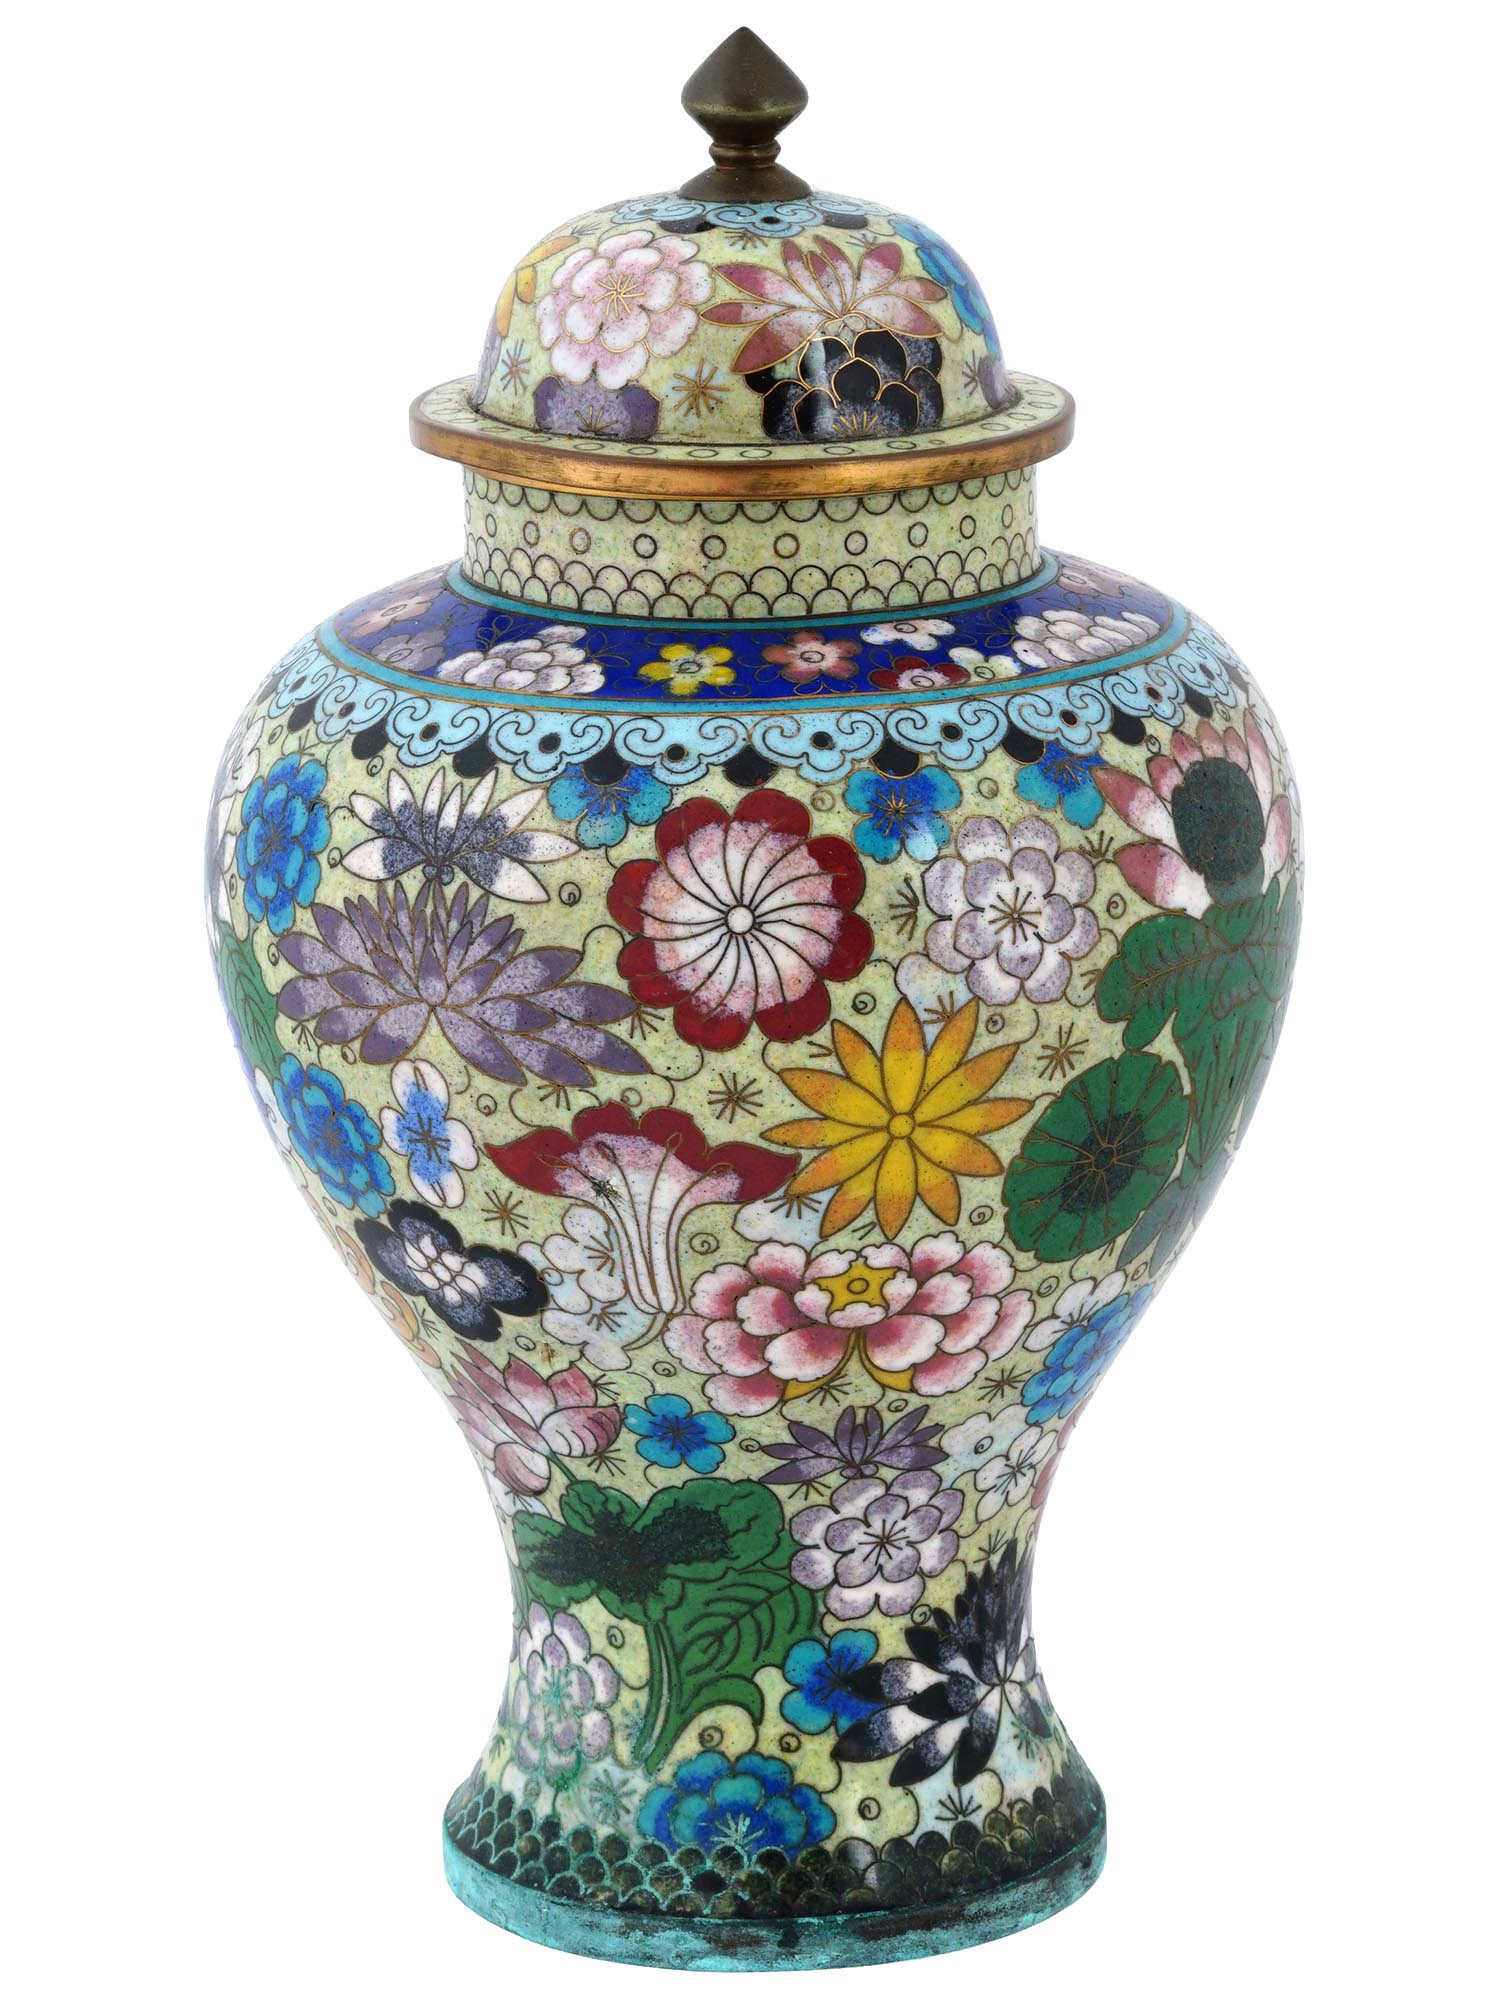 ANTIQUE CHINESE QING DYNASTY CLOISONNE LIDDED JAR PIC-0